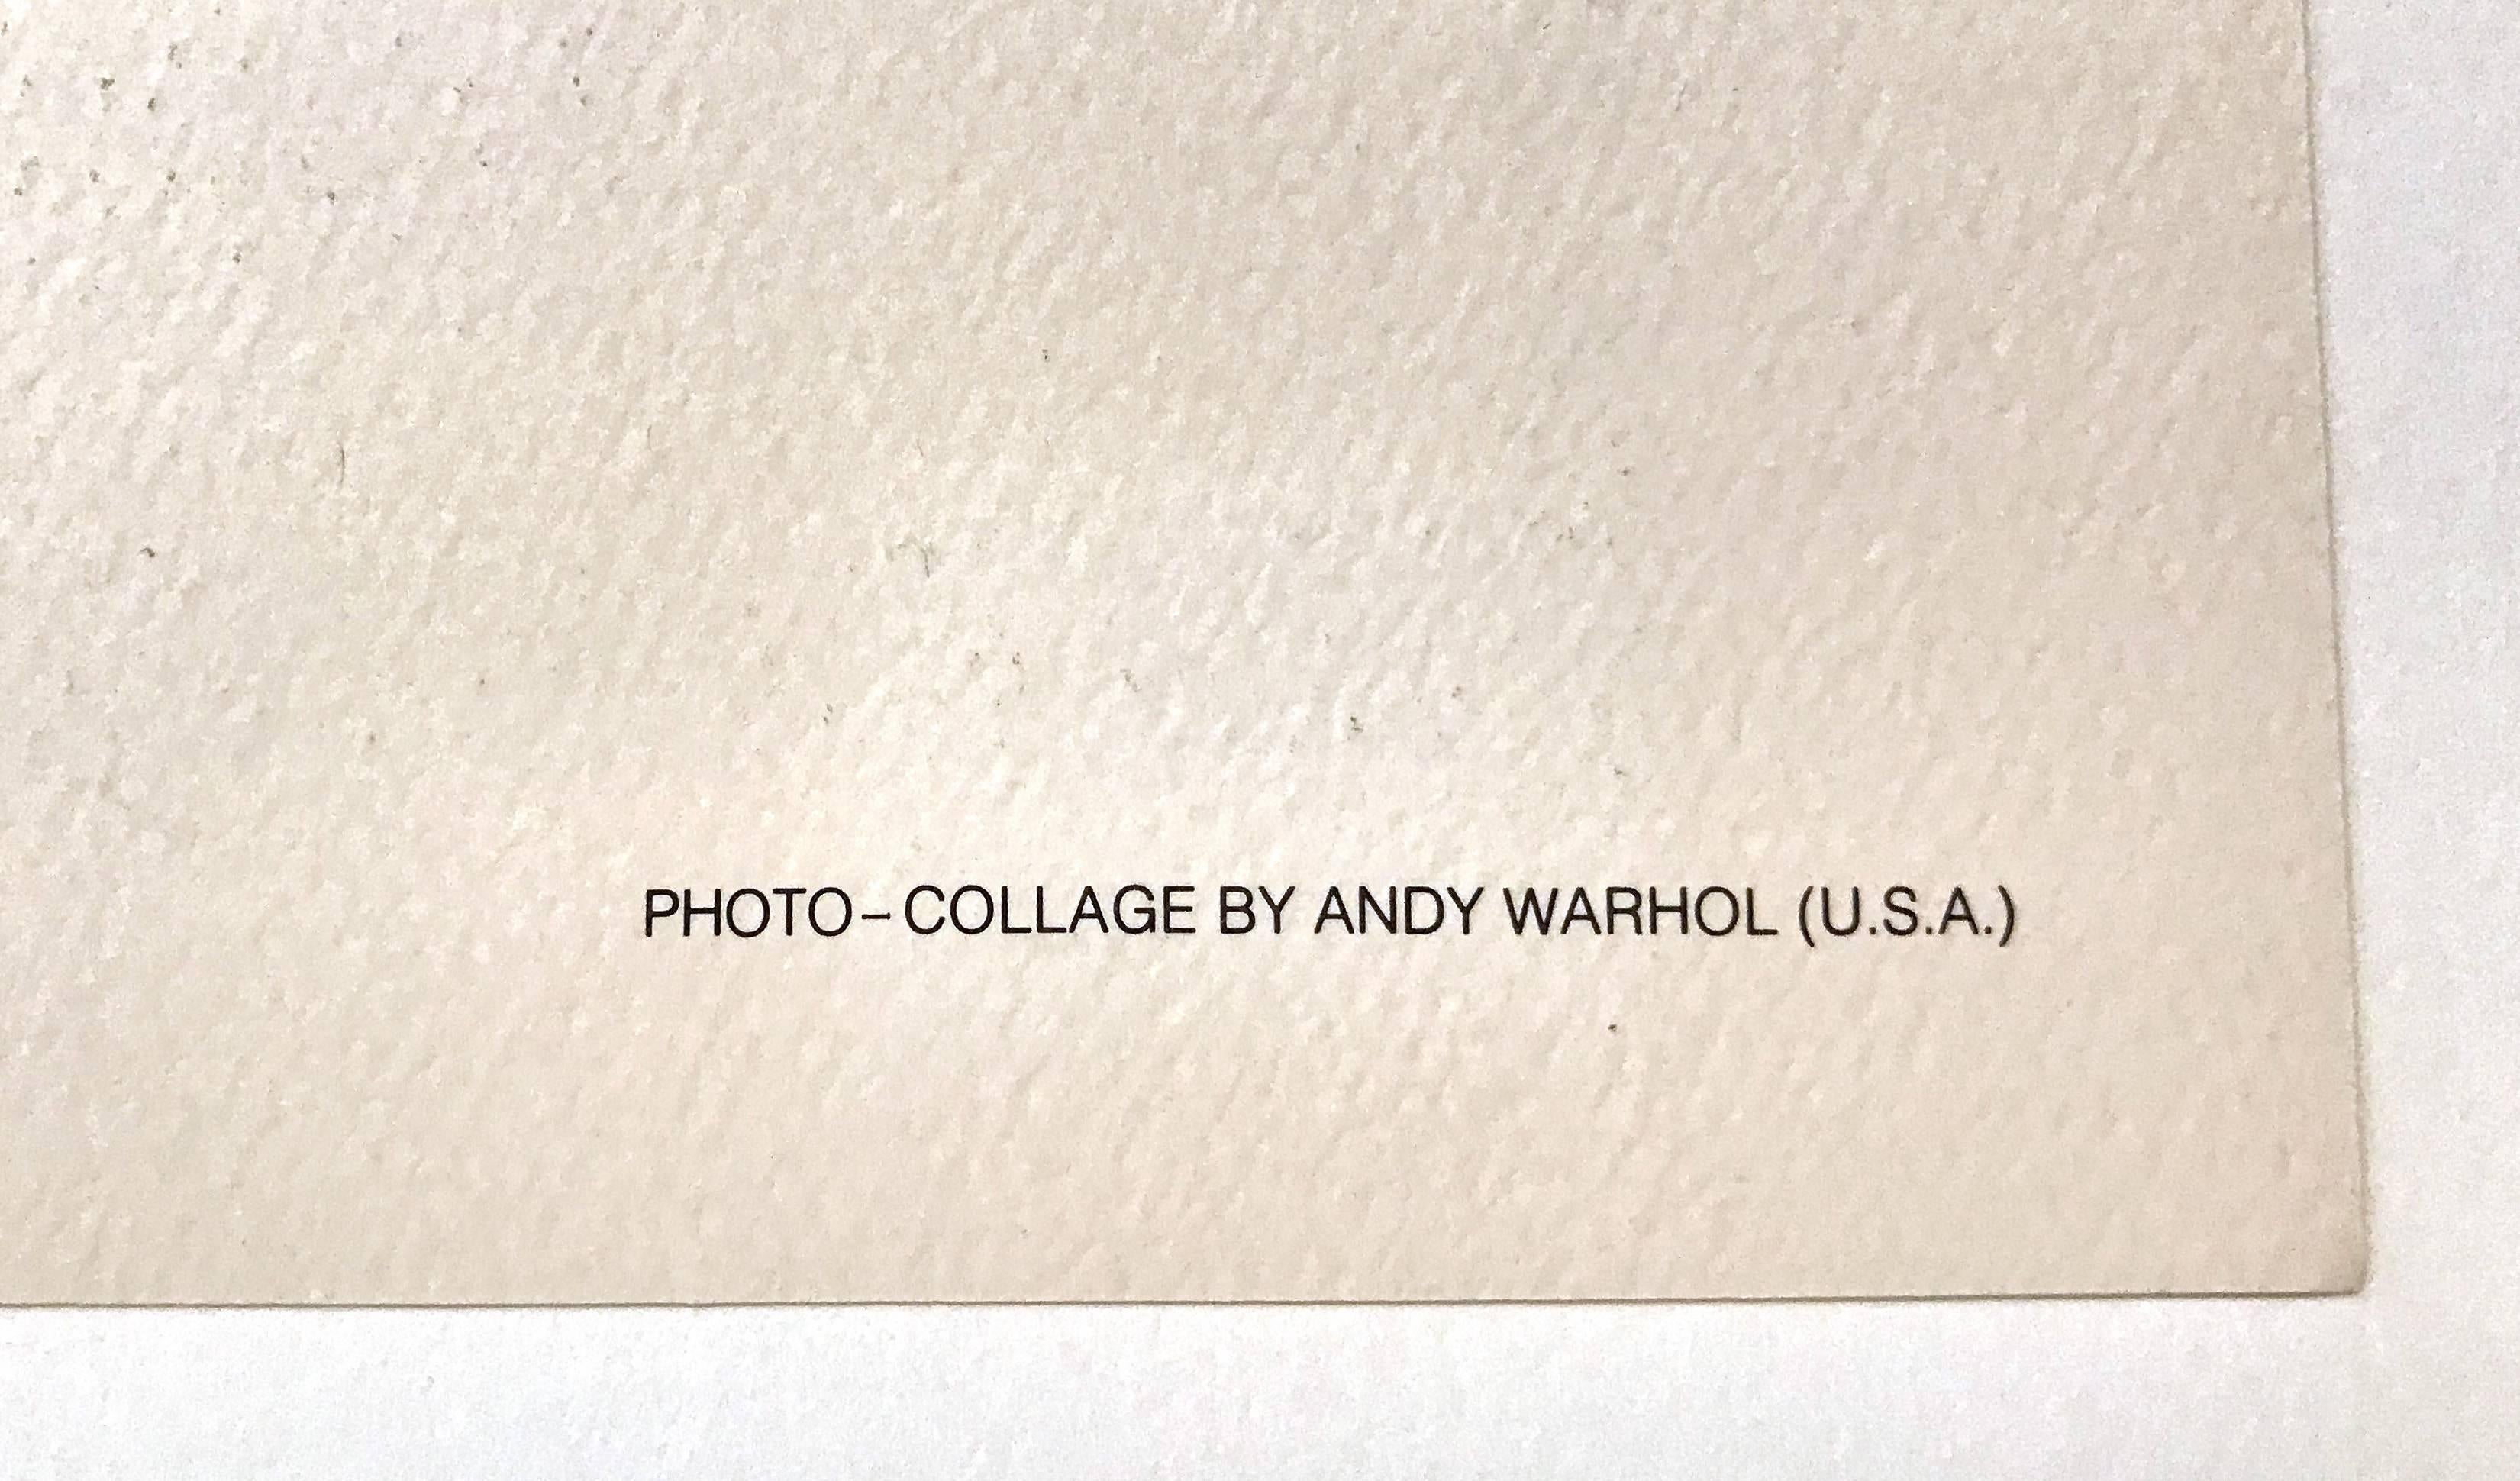 Artist: Andy Warhol
Medium: Original offset lithograph on Rives paper
Title: U.N. Stamp
Year: 1979
Edition: 148/1000
Framed Size: 18 3/4 x 16 1/4 inches
Reference: Feldman II.185
Signed: Signed by Andy Warhol in felt pen
Printer: United